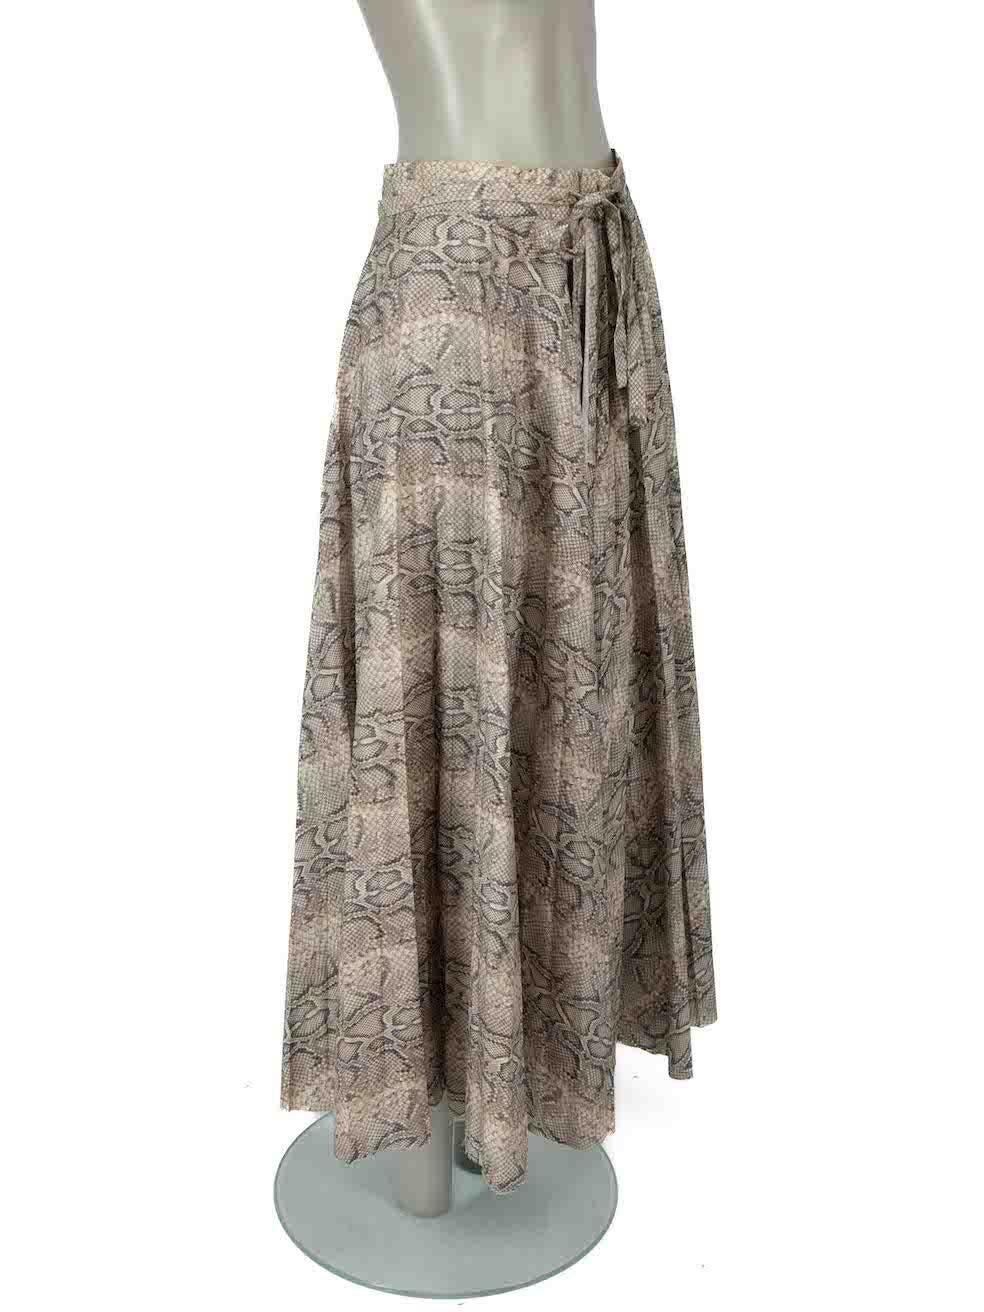 CONDITION is Very good. Minimal wear to skirt is evident. Minimal wear to shape where pleating has relaxed on this used A.W.A.K.E MODE designer resale item.

Details
Grey
Cotton
Wrap skirt
Snakeskin pattern
Midi
Pleated
Waist tie detail
Raw